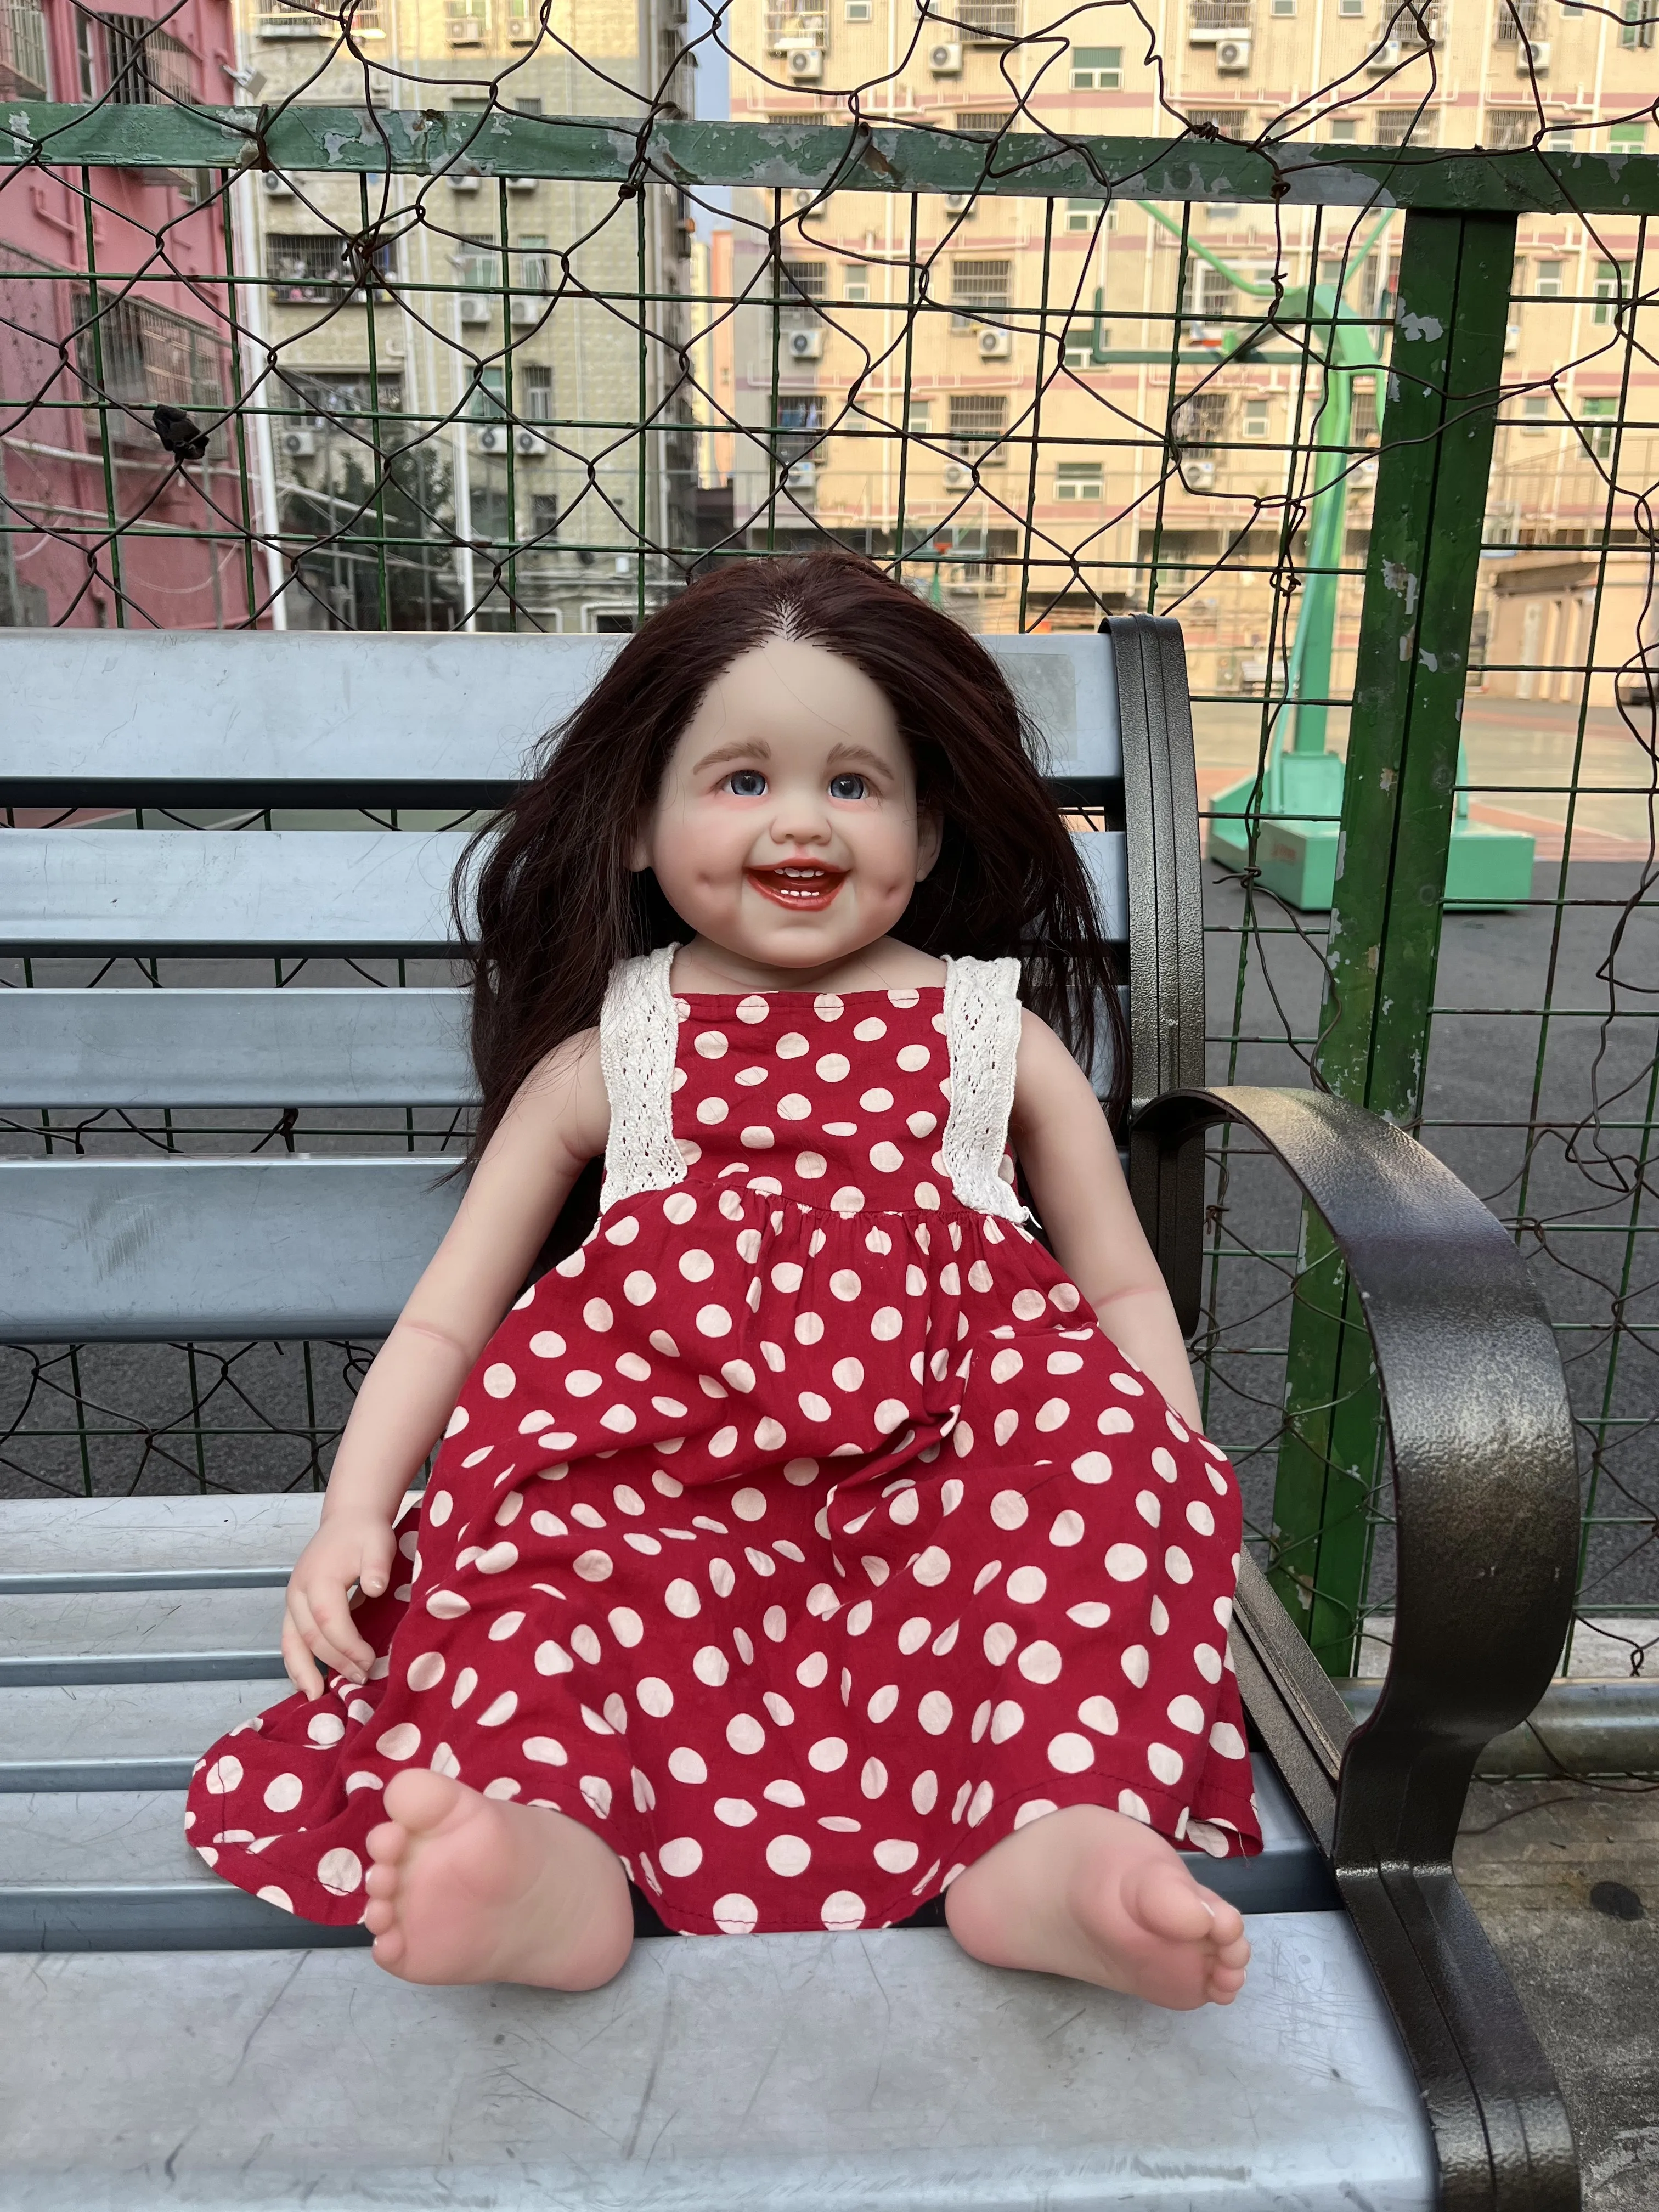 FBBD Customized Limited Supply 32inch Rebron Baby Dimple With Hand-Rooted Long Brown Curly Hair Alredady Finished Doll 32inch reborn baby shanti unpainted kit without connectors with cloth body diy part dolls for children